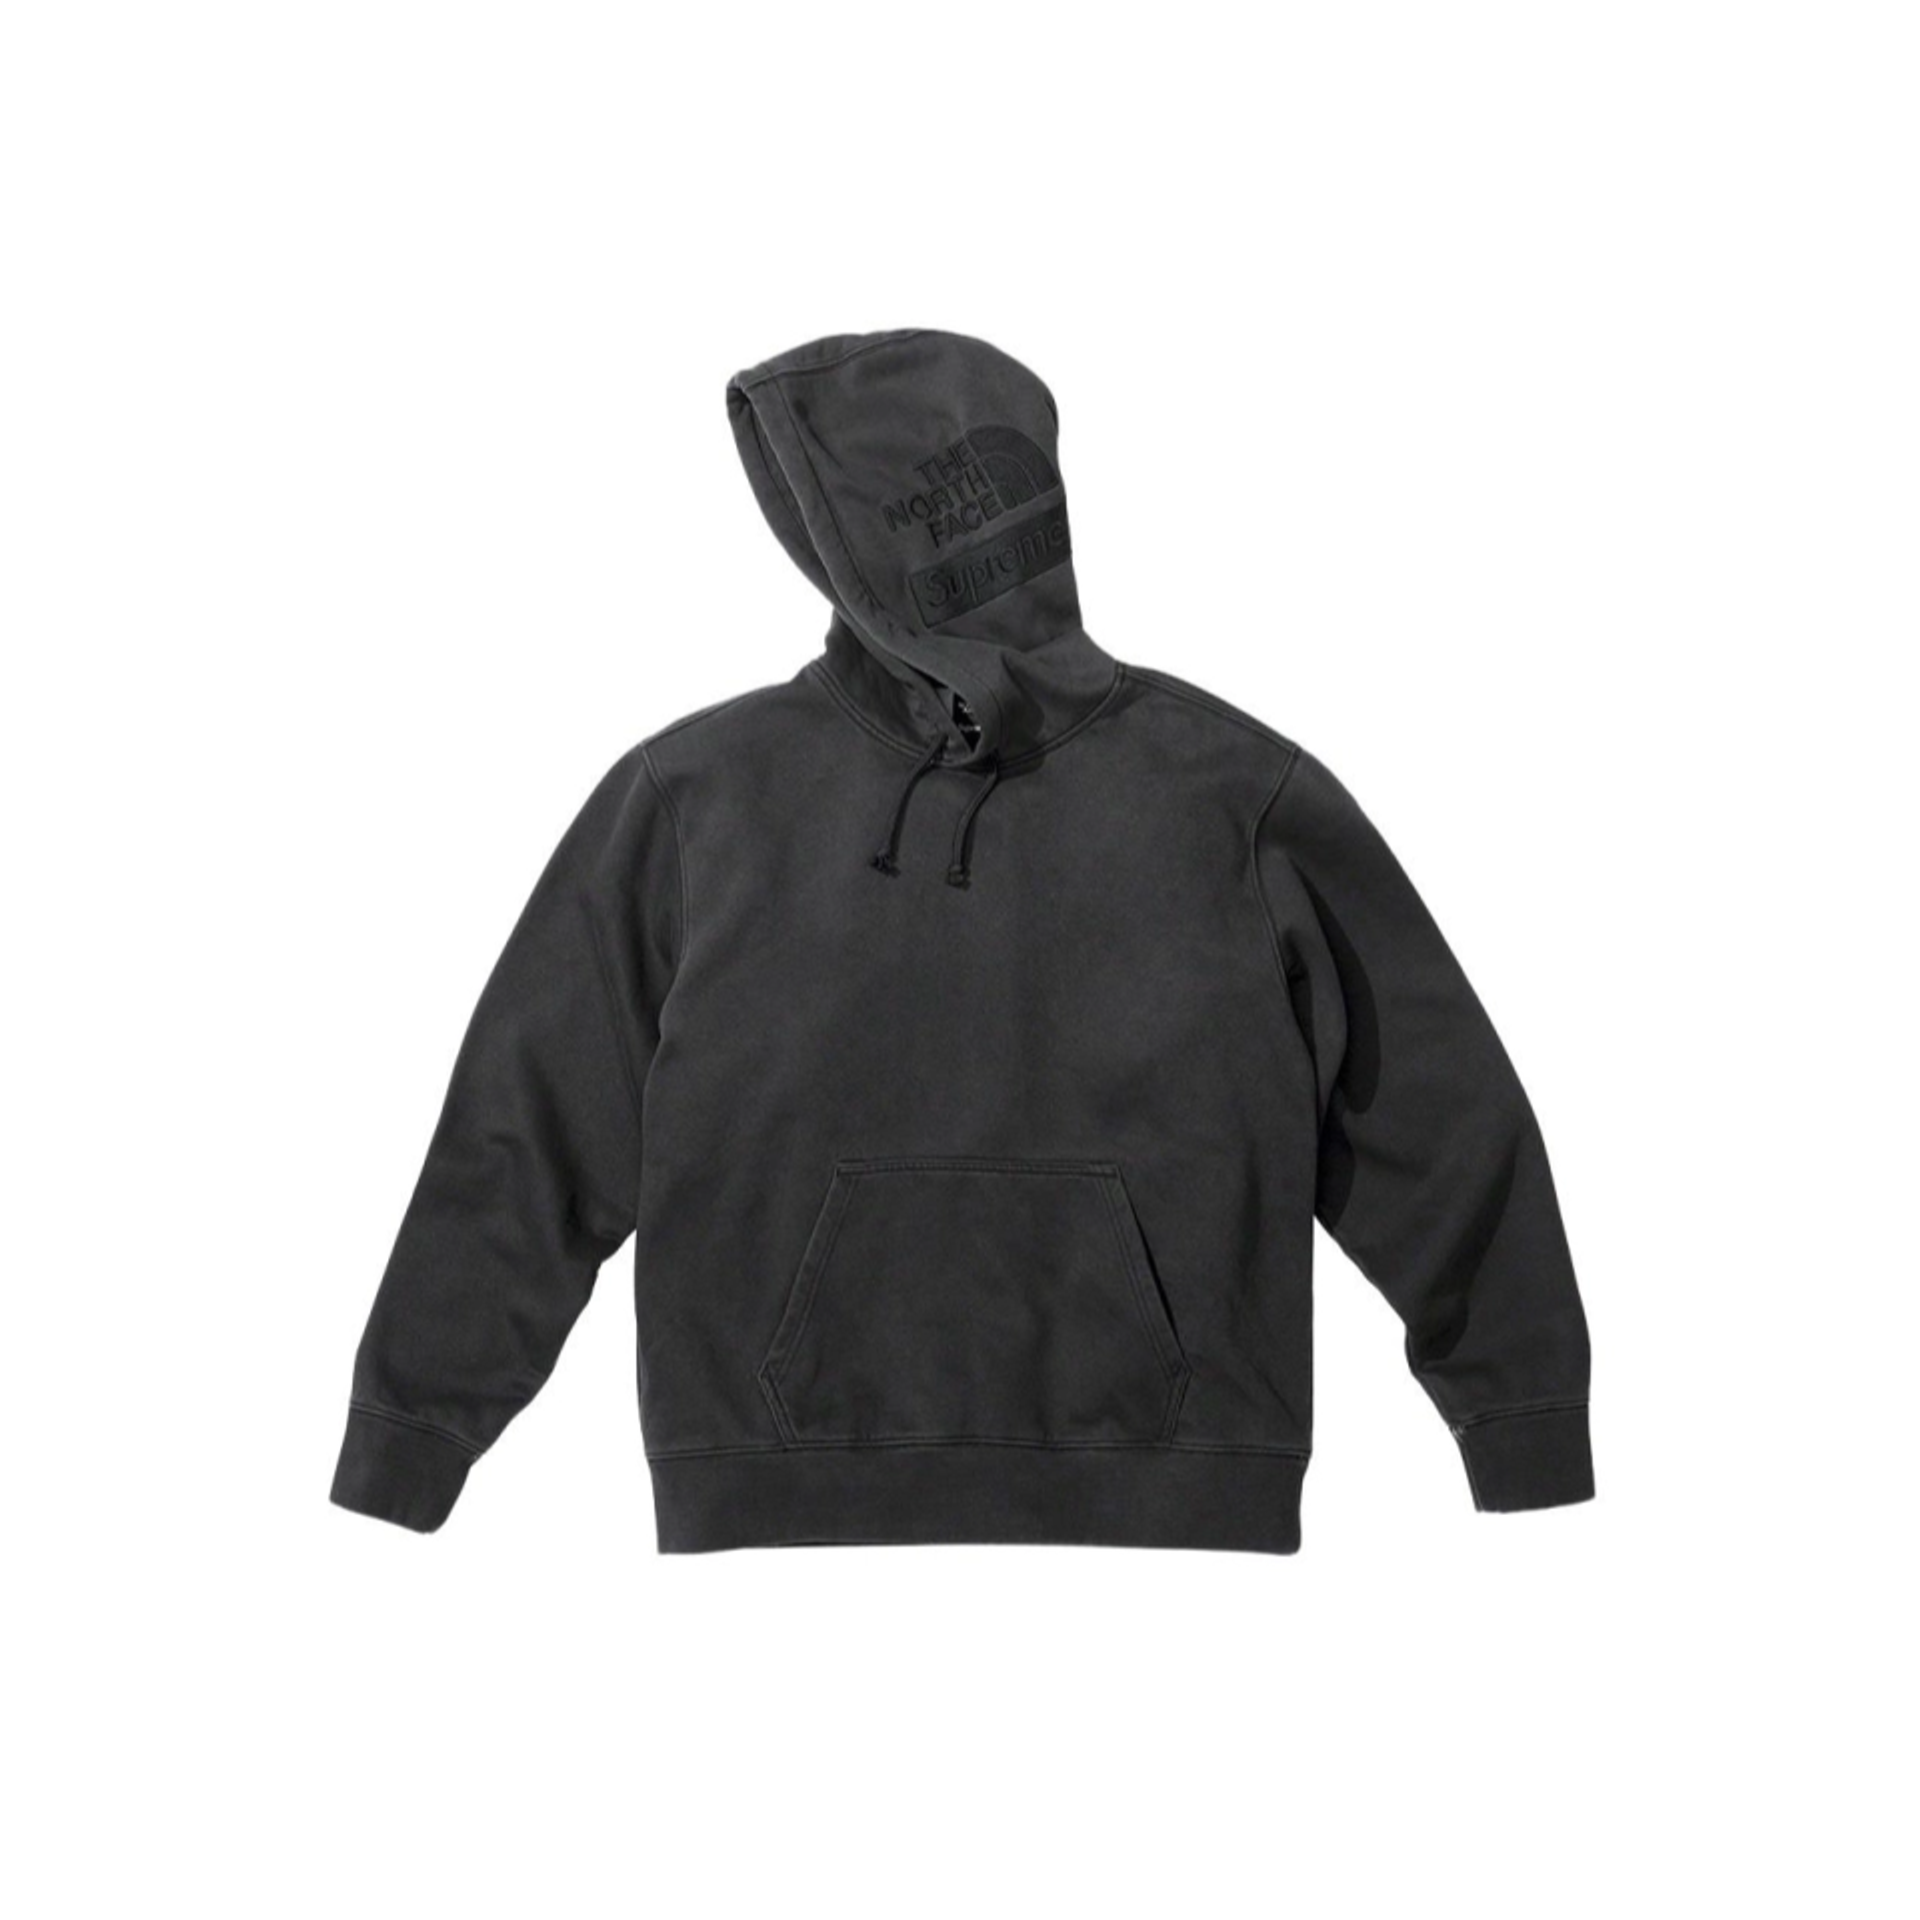  Supreme x The North Face Pigment Printed Hooded Sweatshirt 'Black'